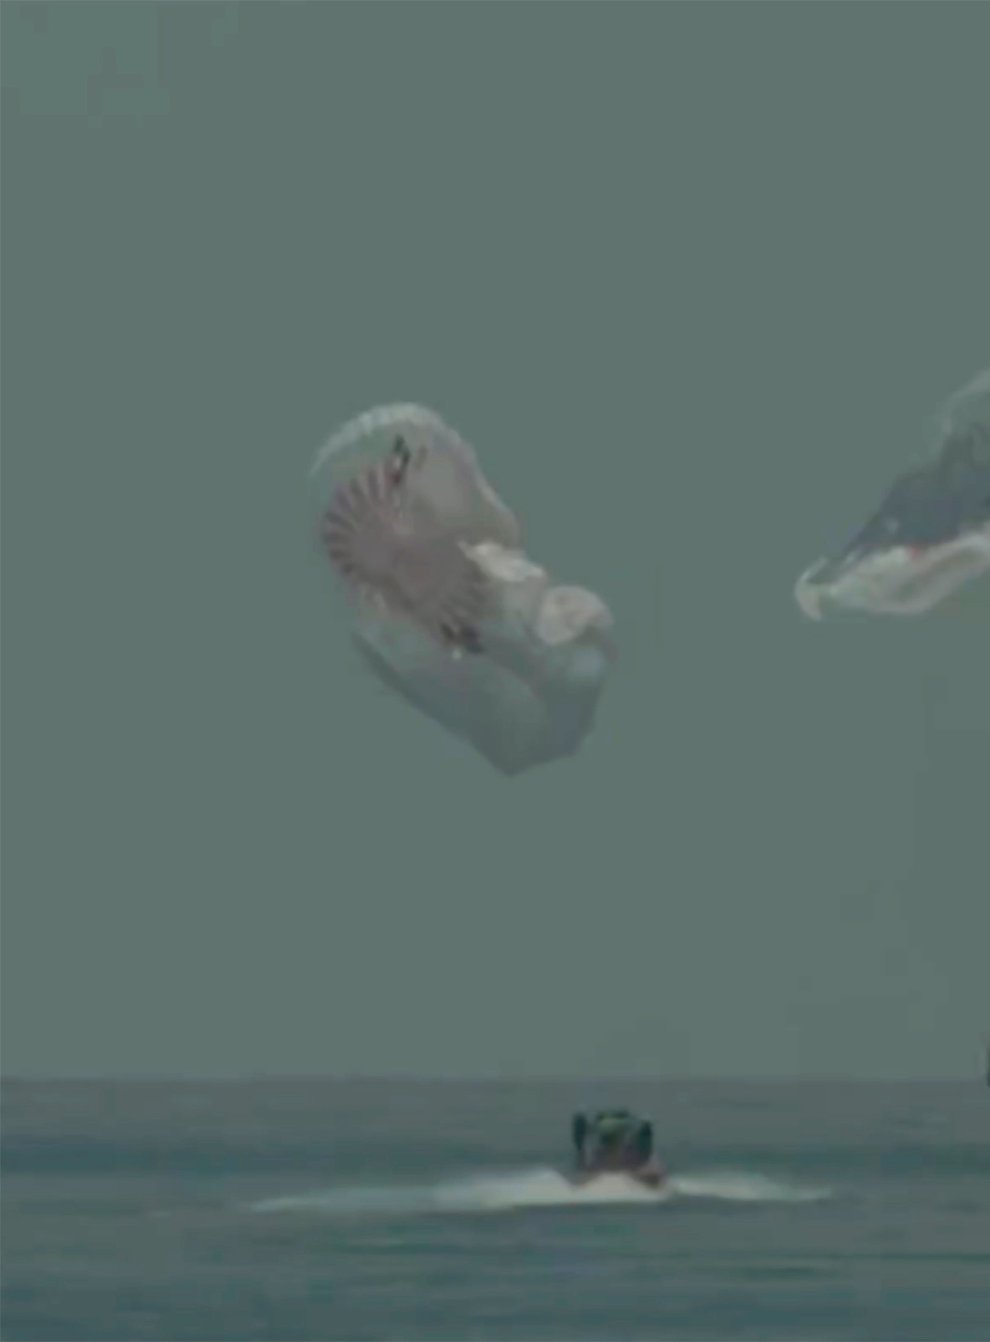 SpaceX capsule splashing down in the Gulf of Mexico 